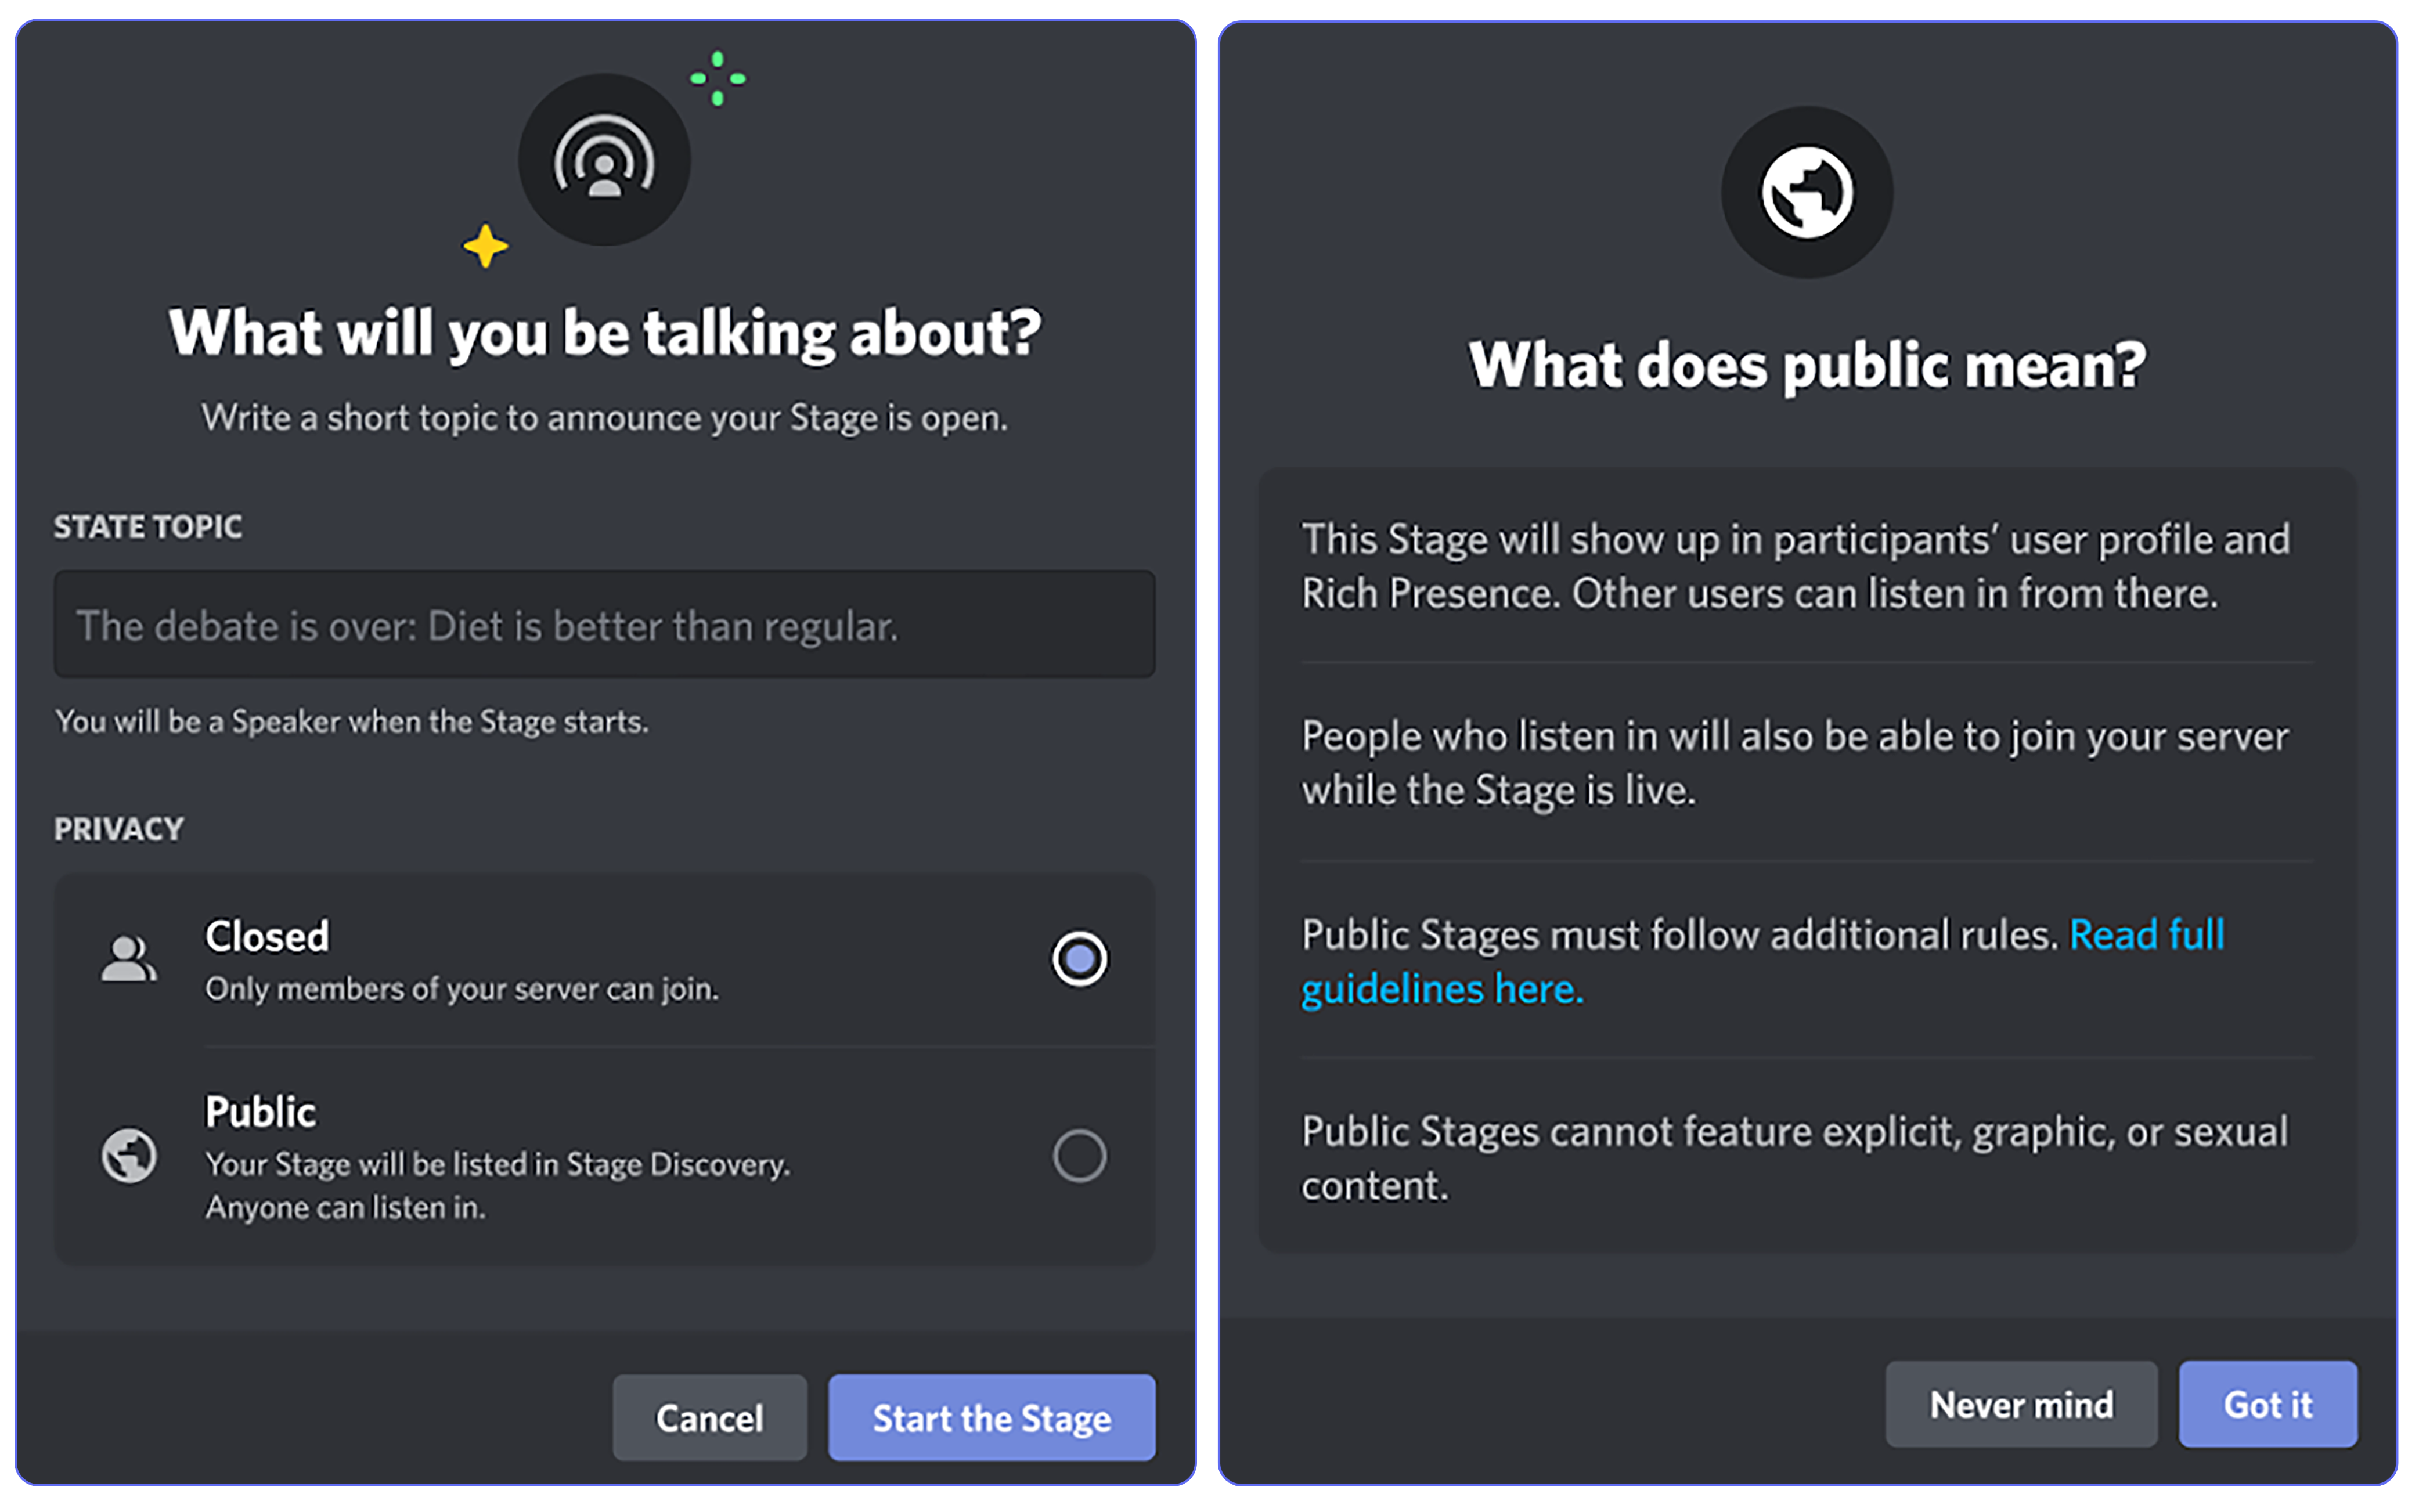 Discord to End Its Stage Discovery Tool, Will Continue to Invest in Stage  Channels